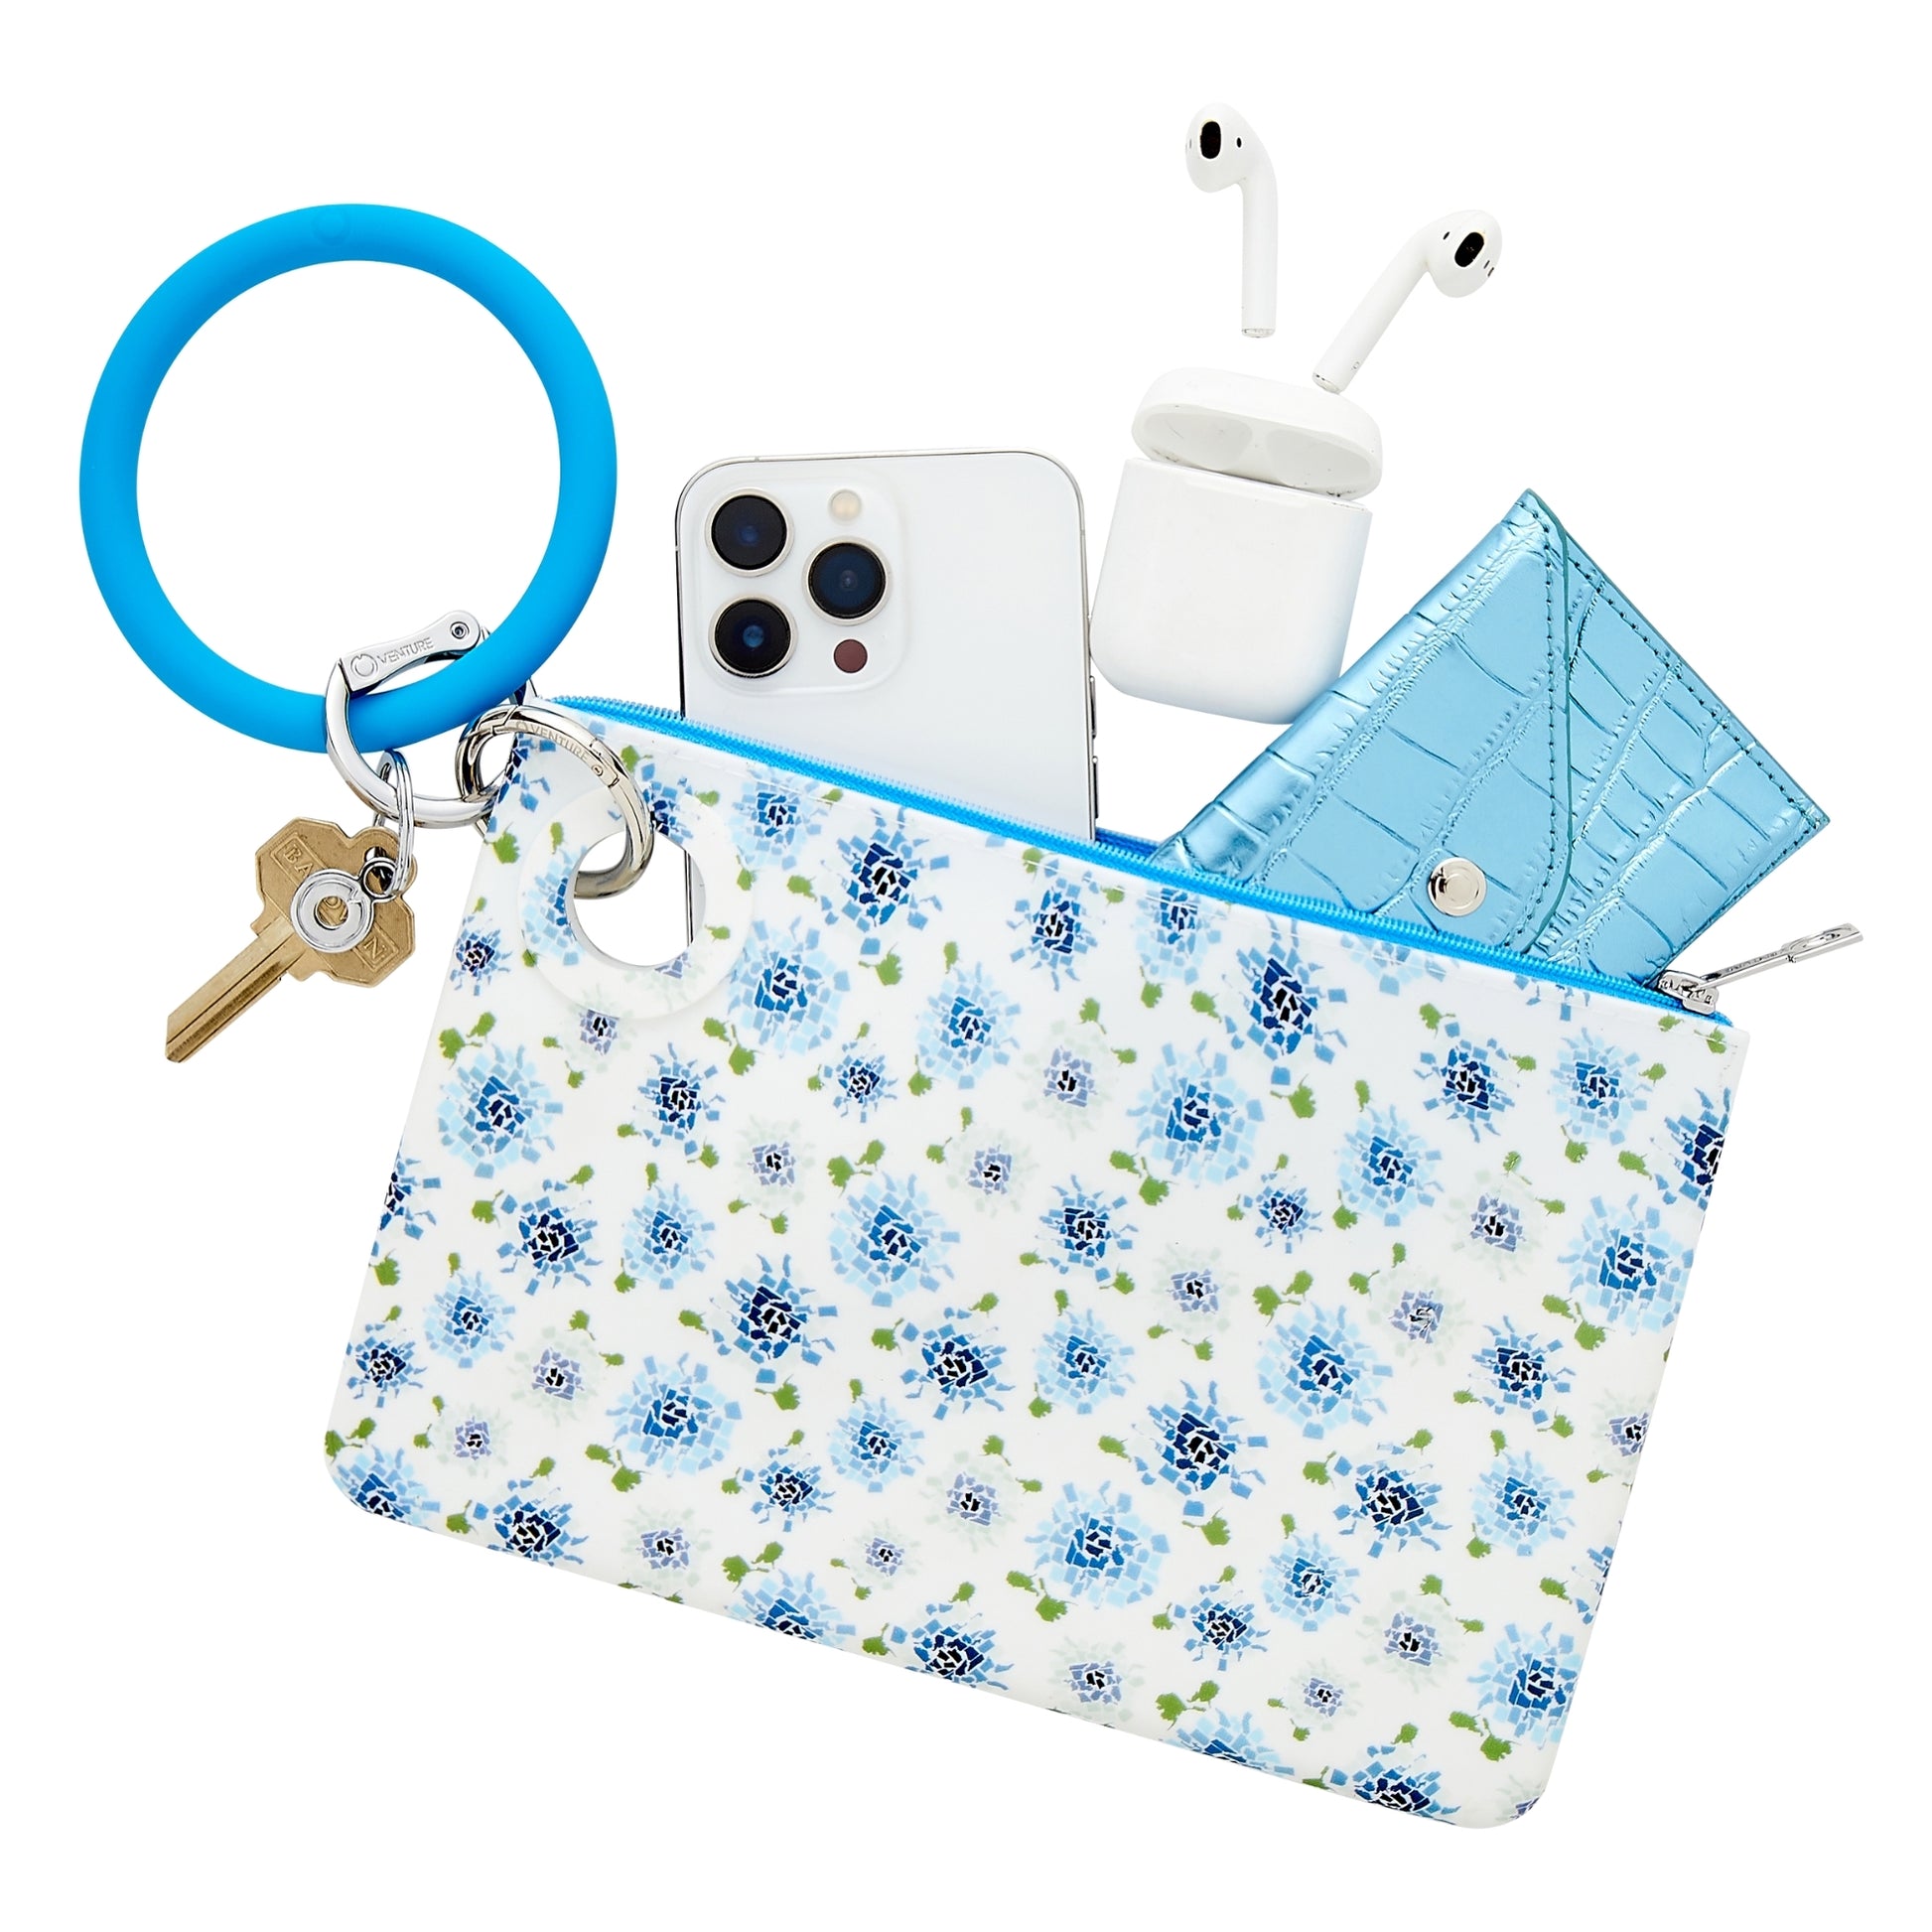 Fifty States Blue - Large Silicone Pouch - Oventure attached to the peacock silicone Big O Key Ring. The pouch holds air pods, a mini envelope wallet and an iPhone